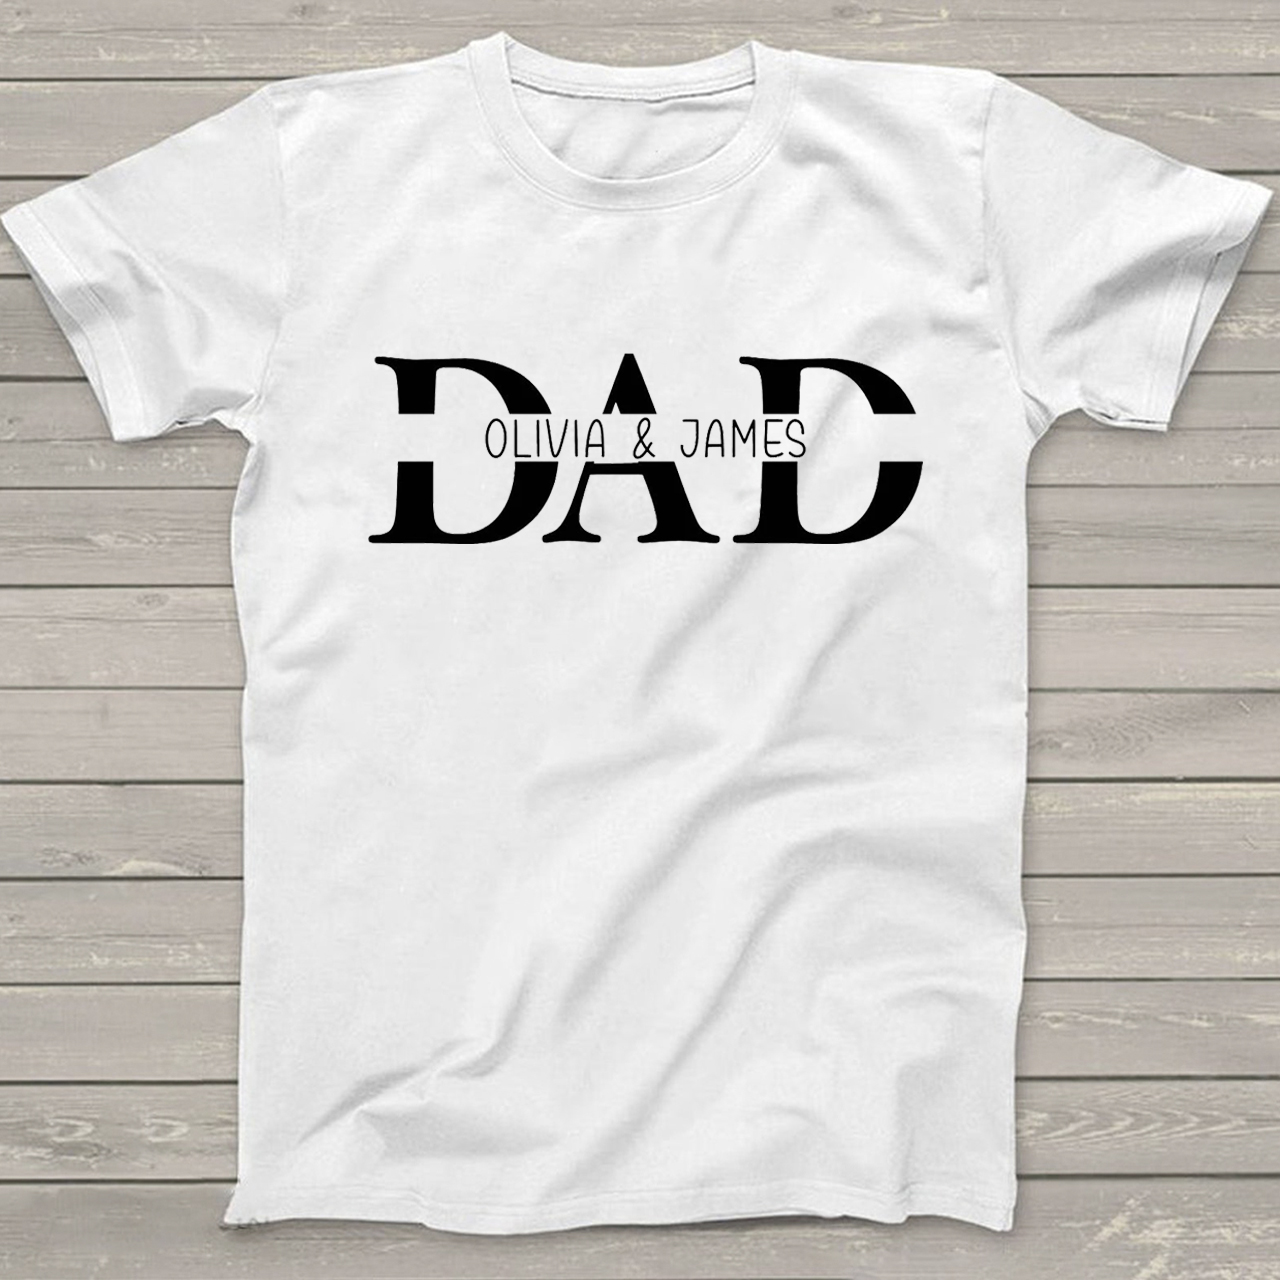 Personalized Father's Day Shirts With Kids Name